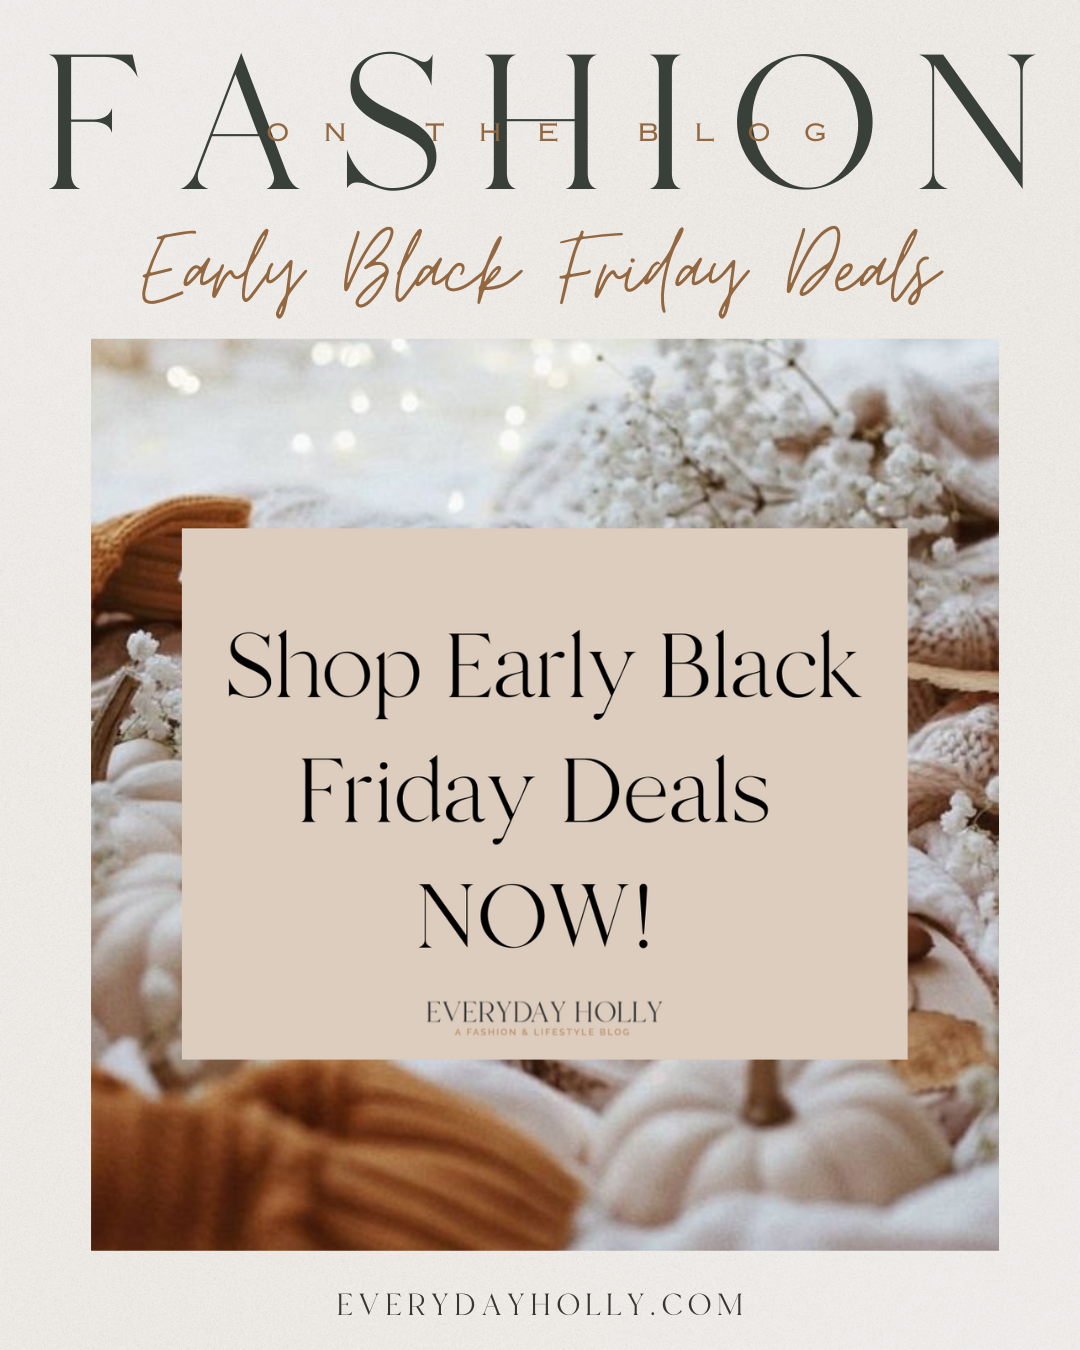 shop early black friday deals now | #shop #blackfriday #deals #earlyblackfriday #shopping #gifts 